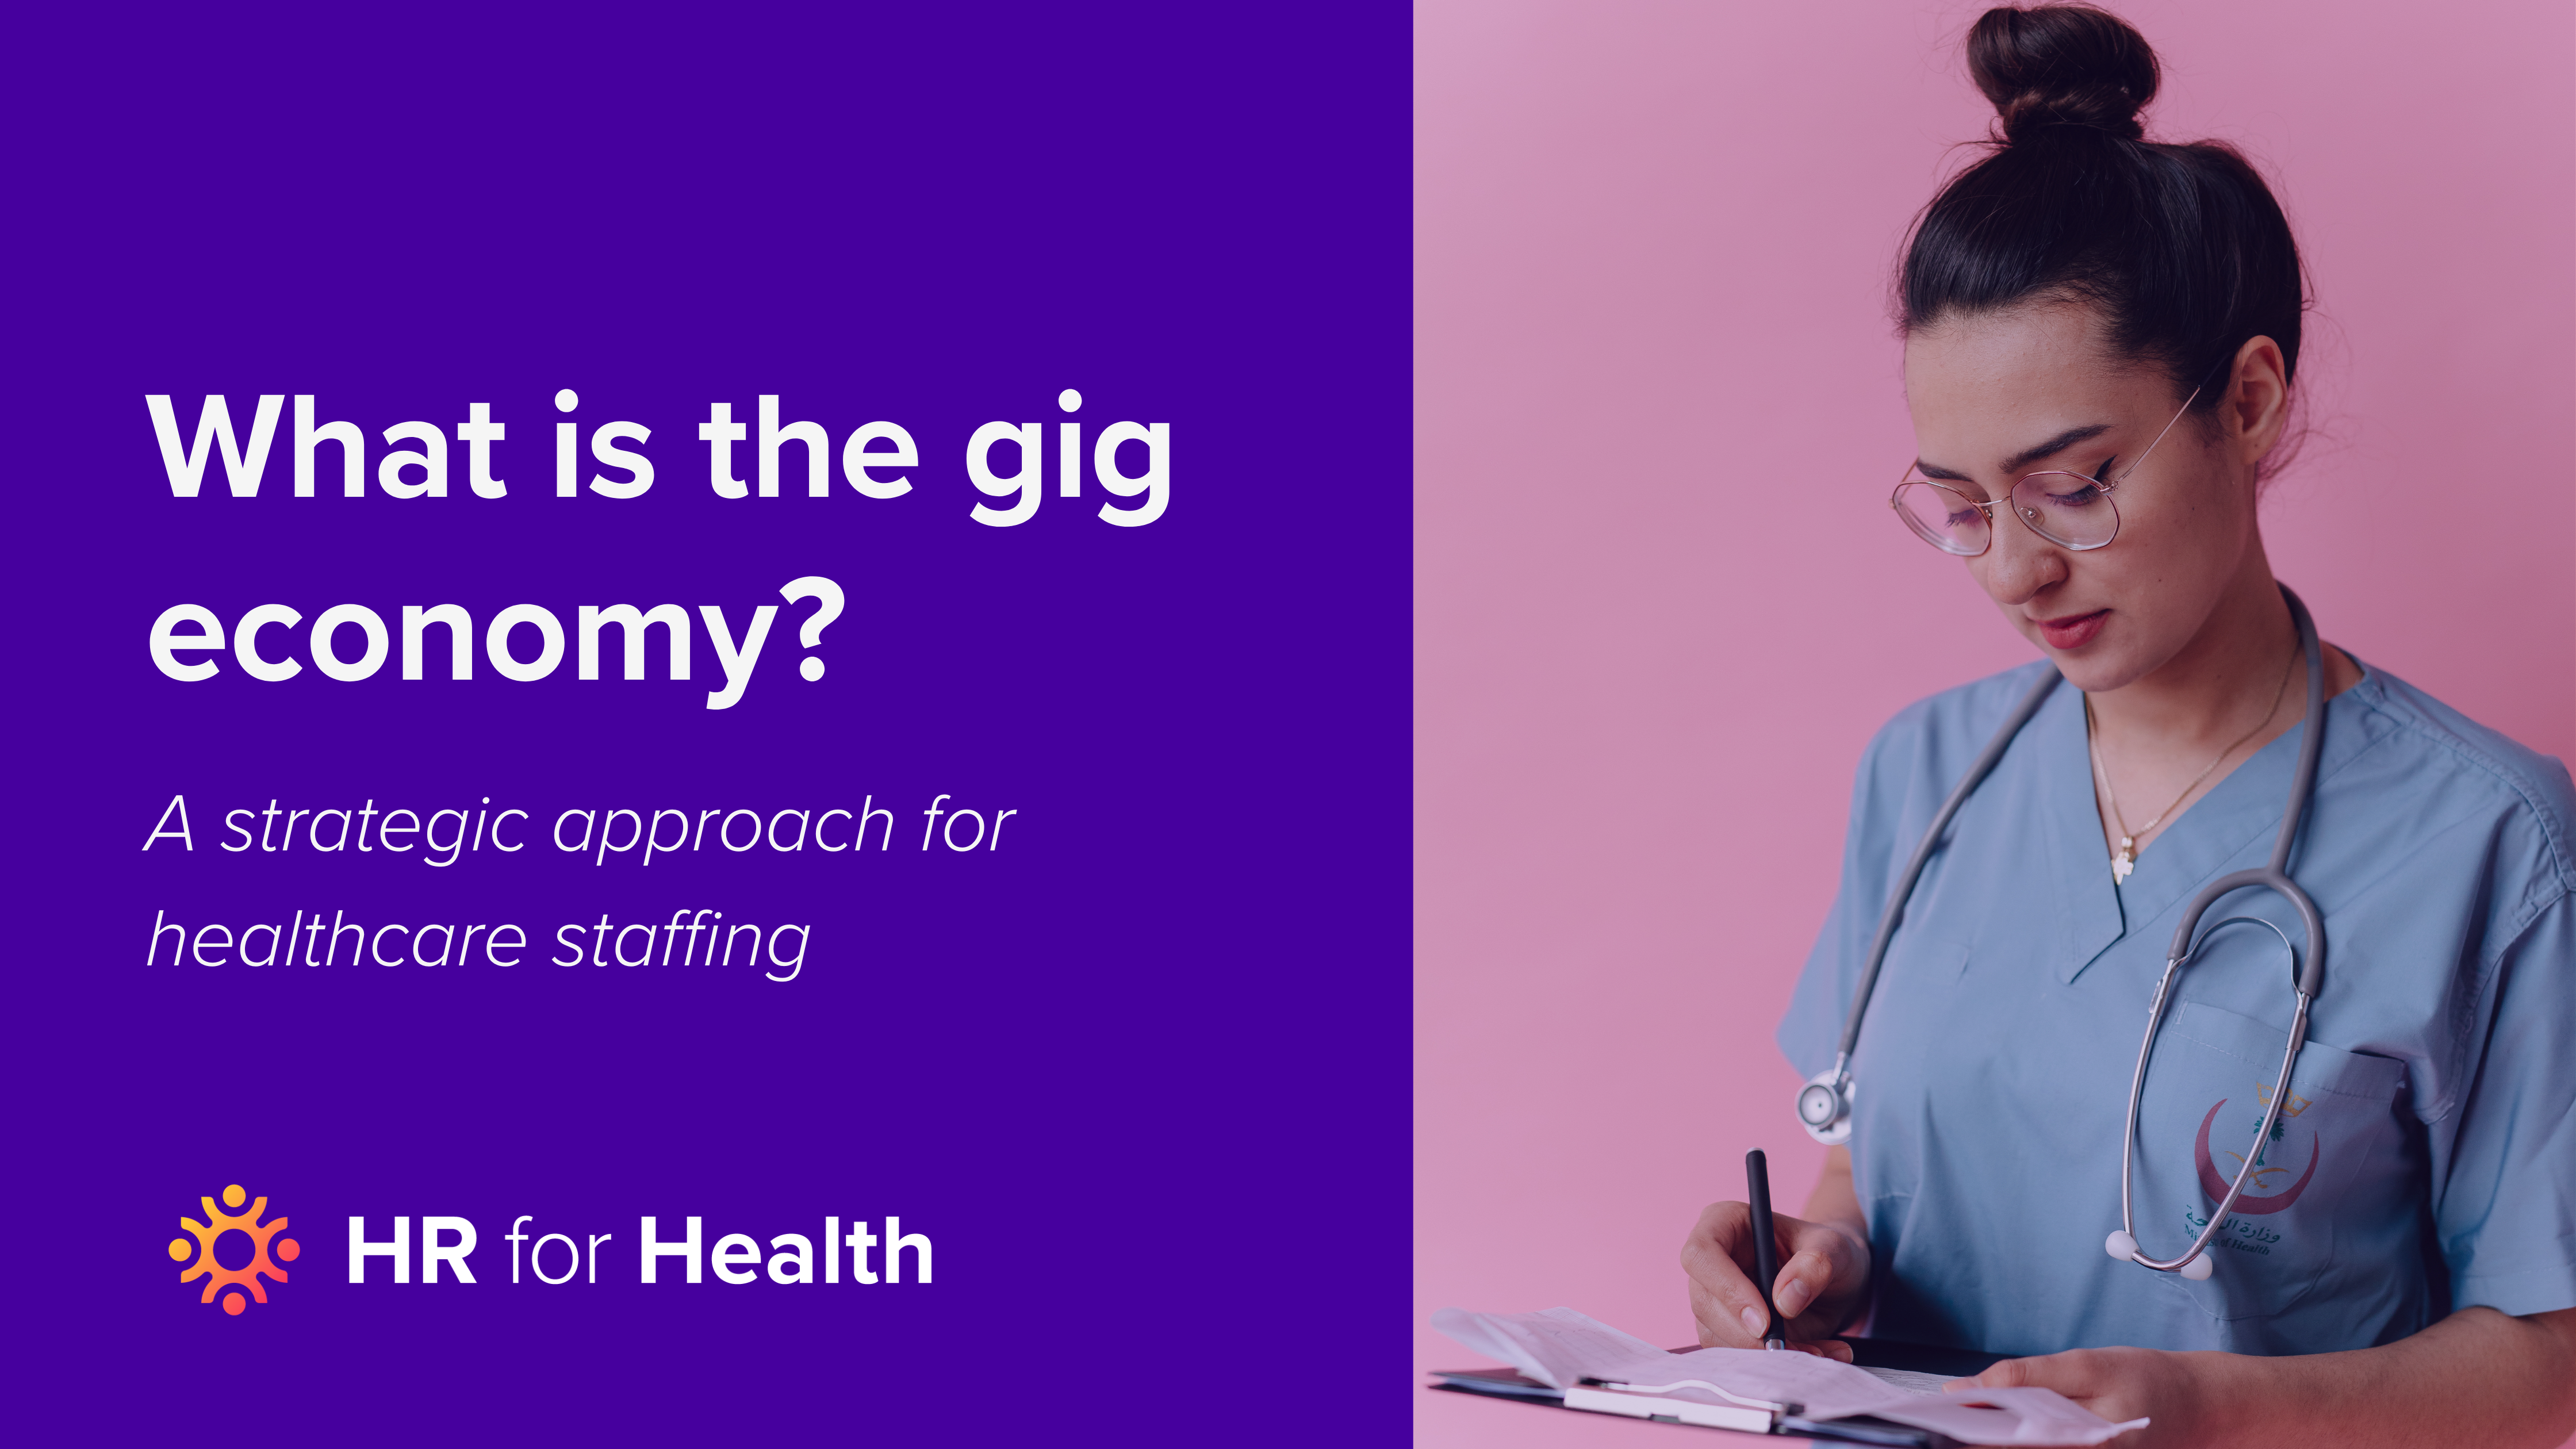 What is the gig economy in healthcare